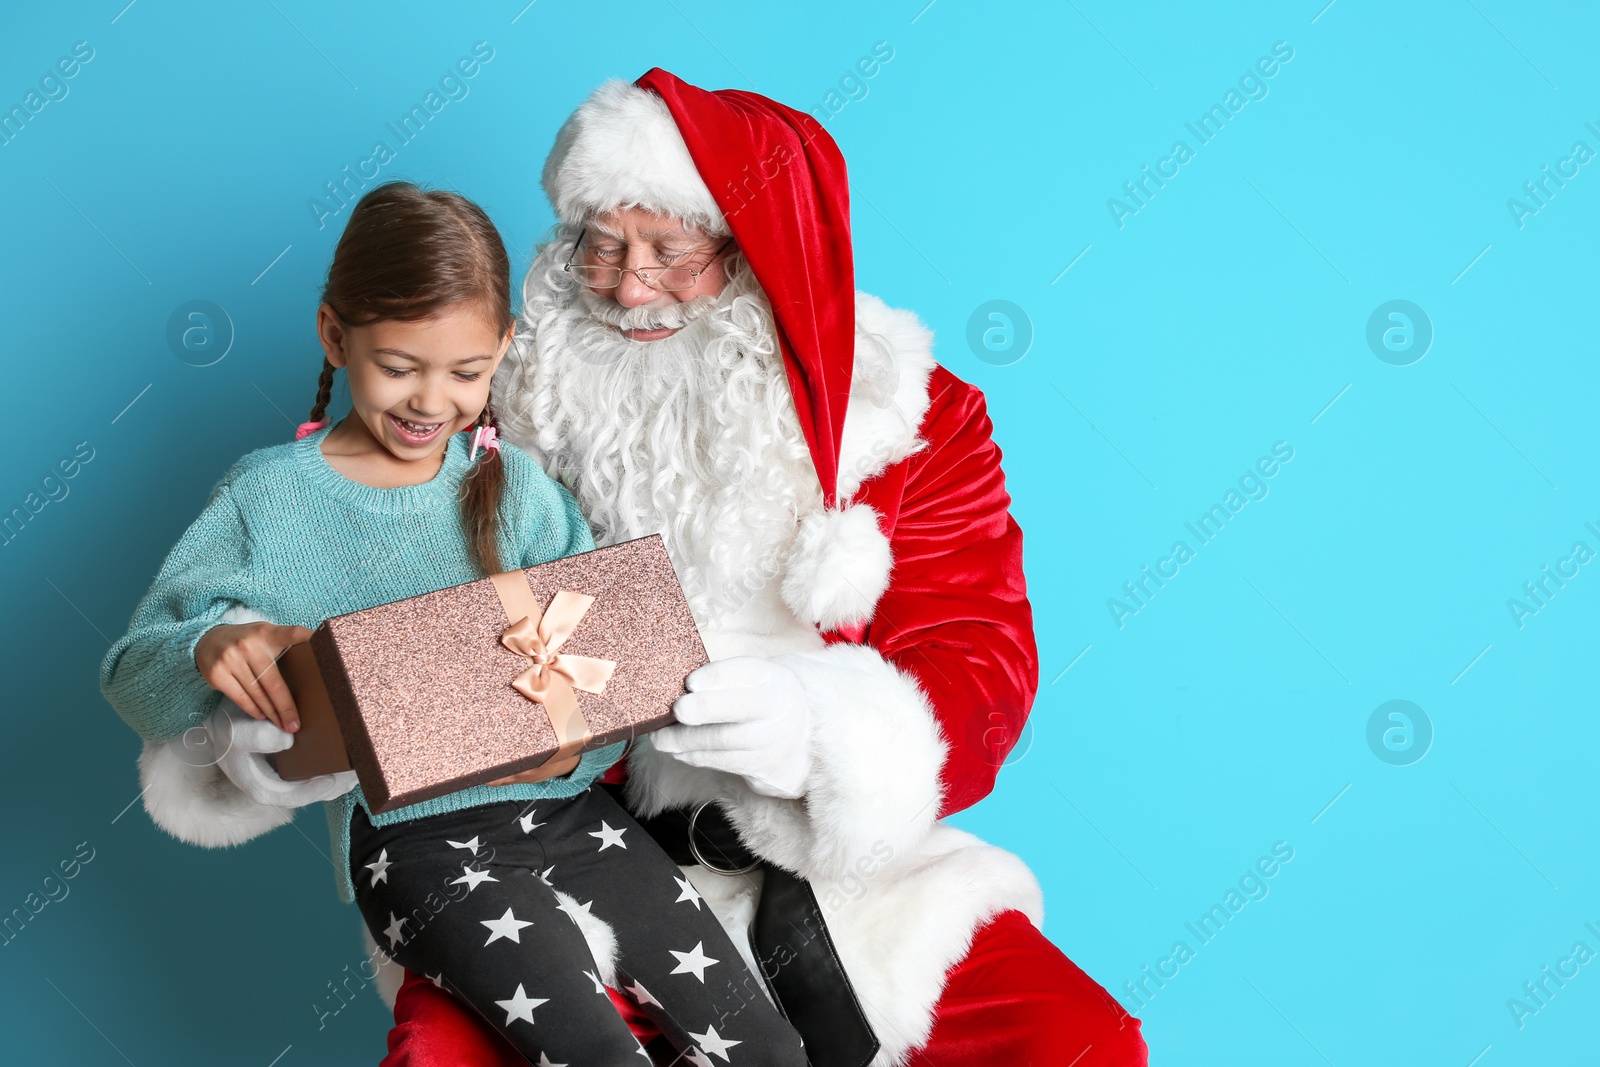 Photo of Little girl with gift box sitting on authentic Santa Claus' lap against color background